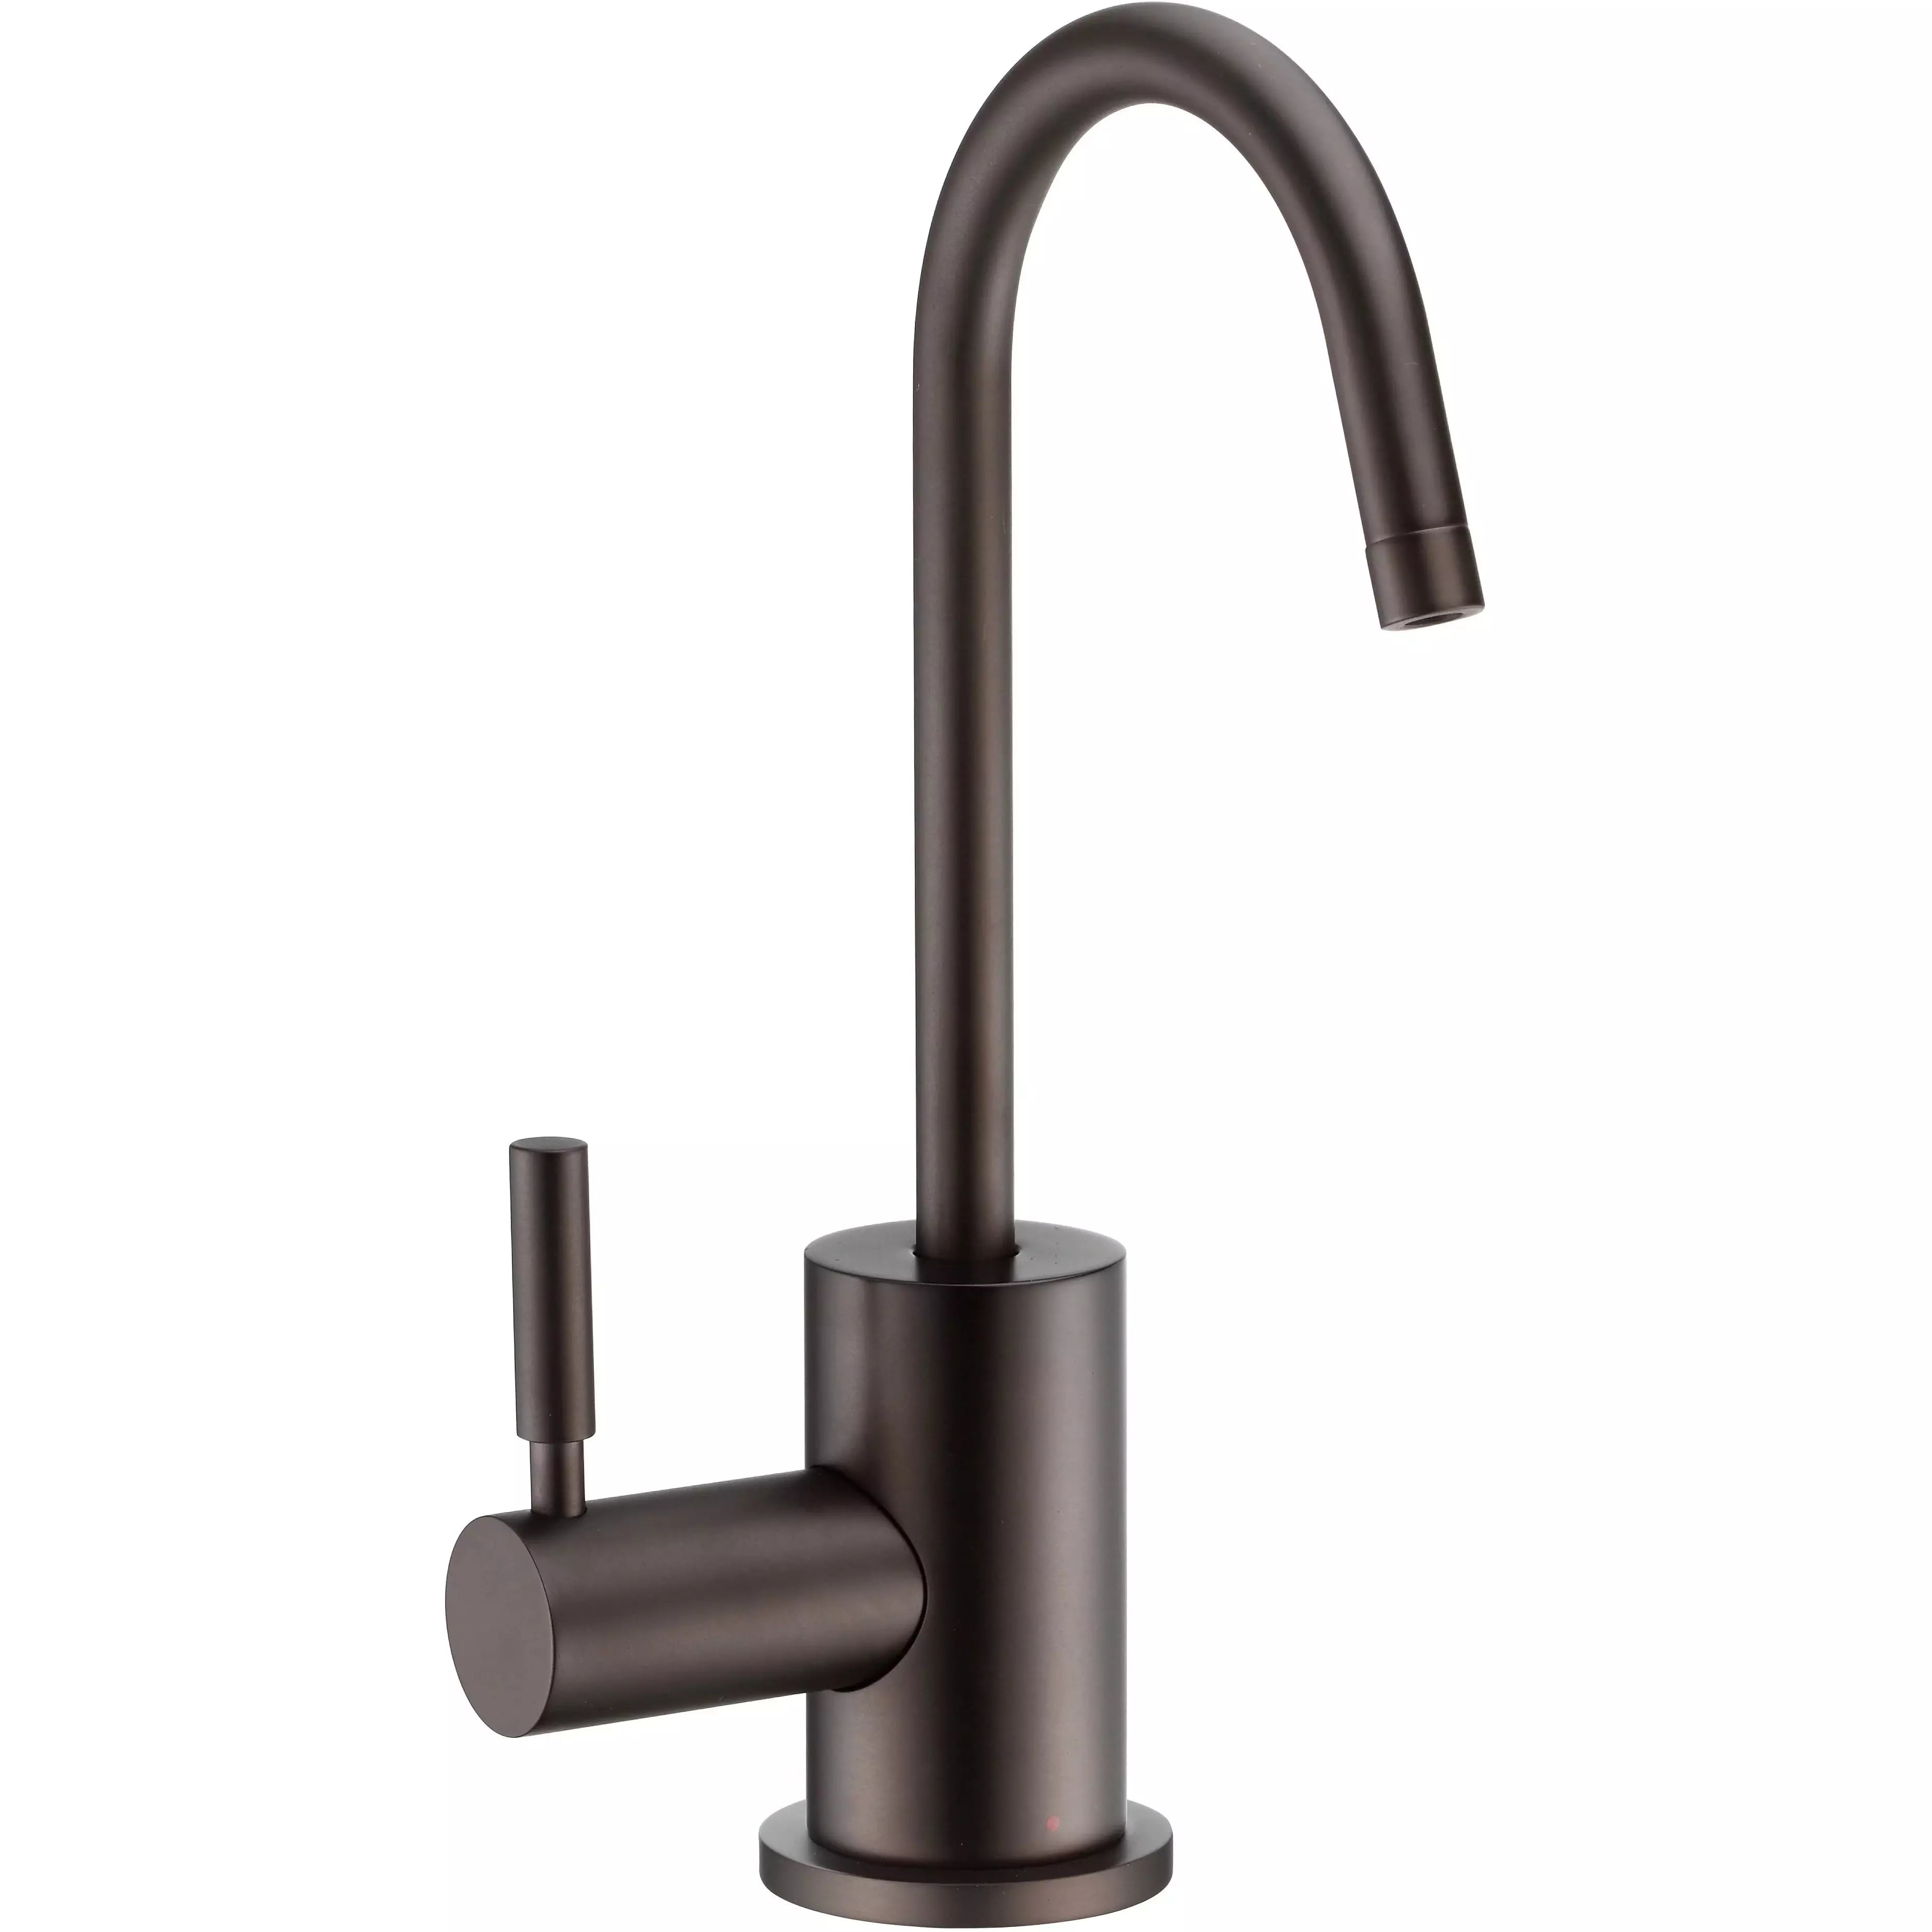 WHITEHAUS Point of Use Instant Hot Water Drinking Faucet with Gooseneck Swivel Spout - WHFH-H1010